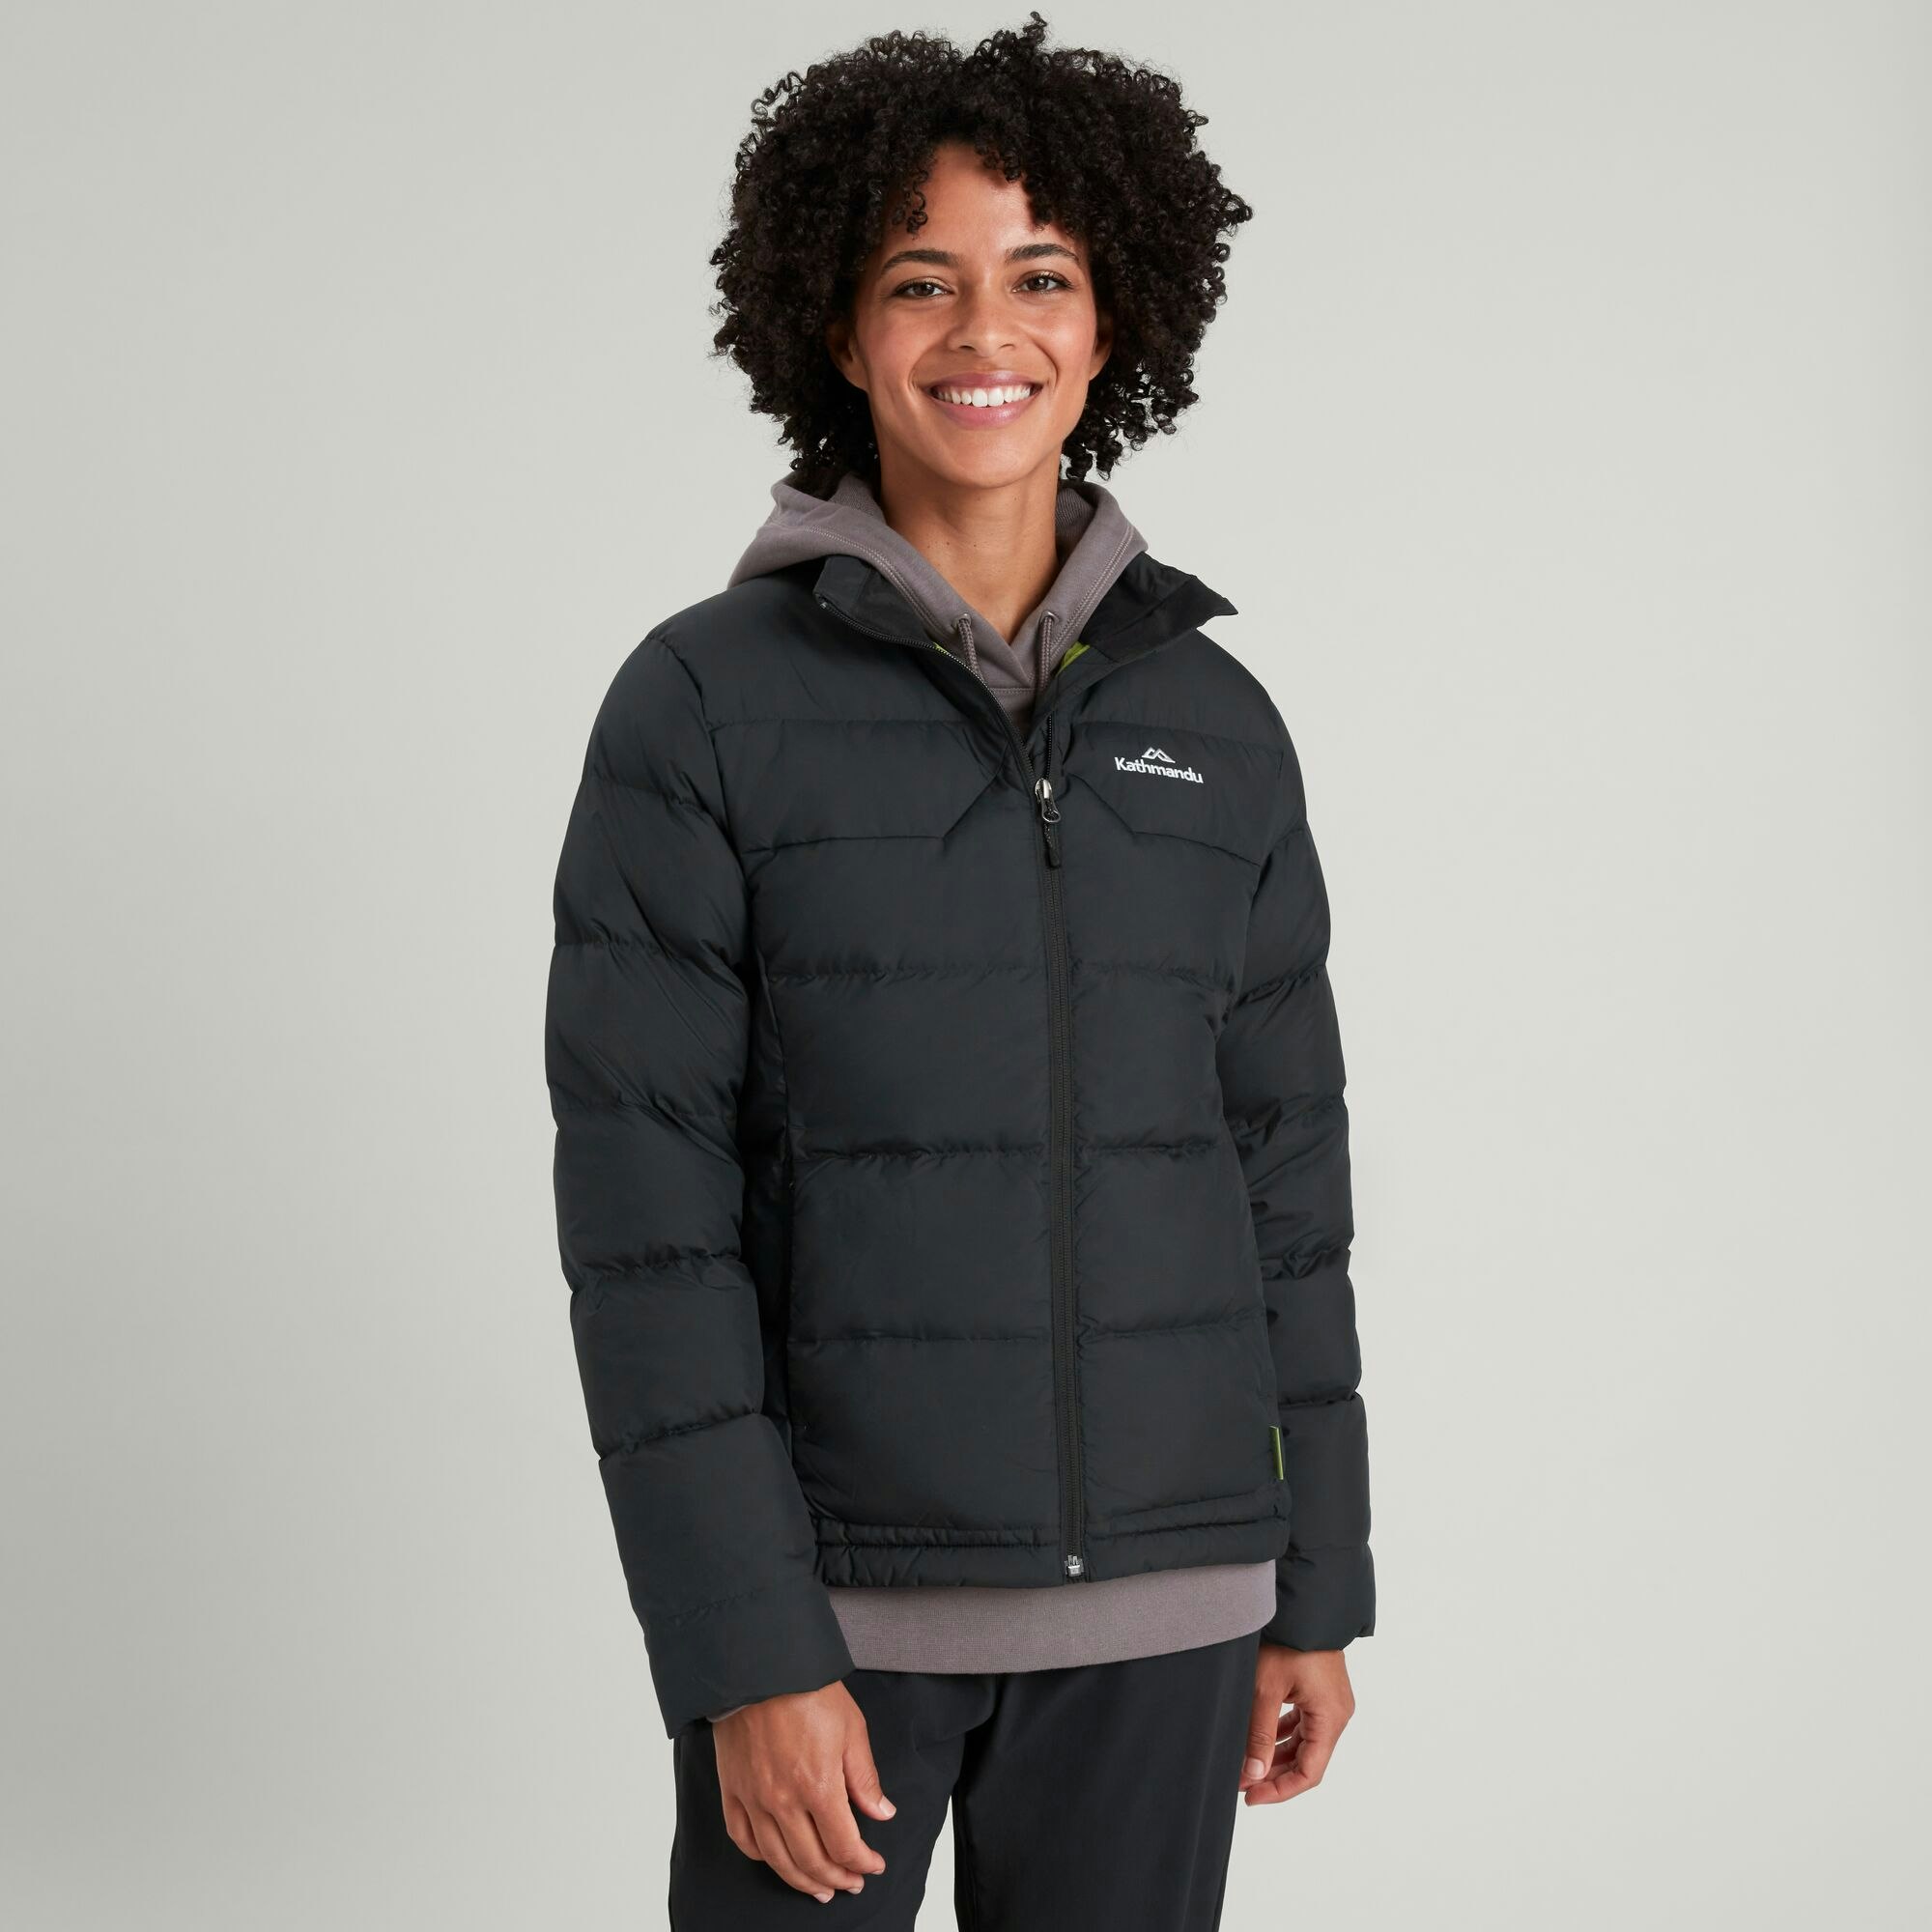 7 Best Puffer Jackets for Women with Just the Right Amount of Puff